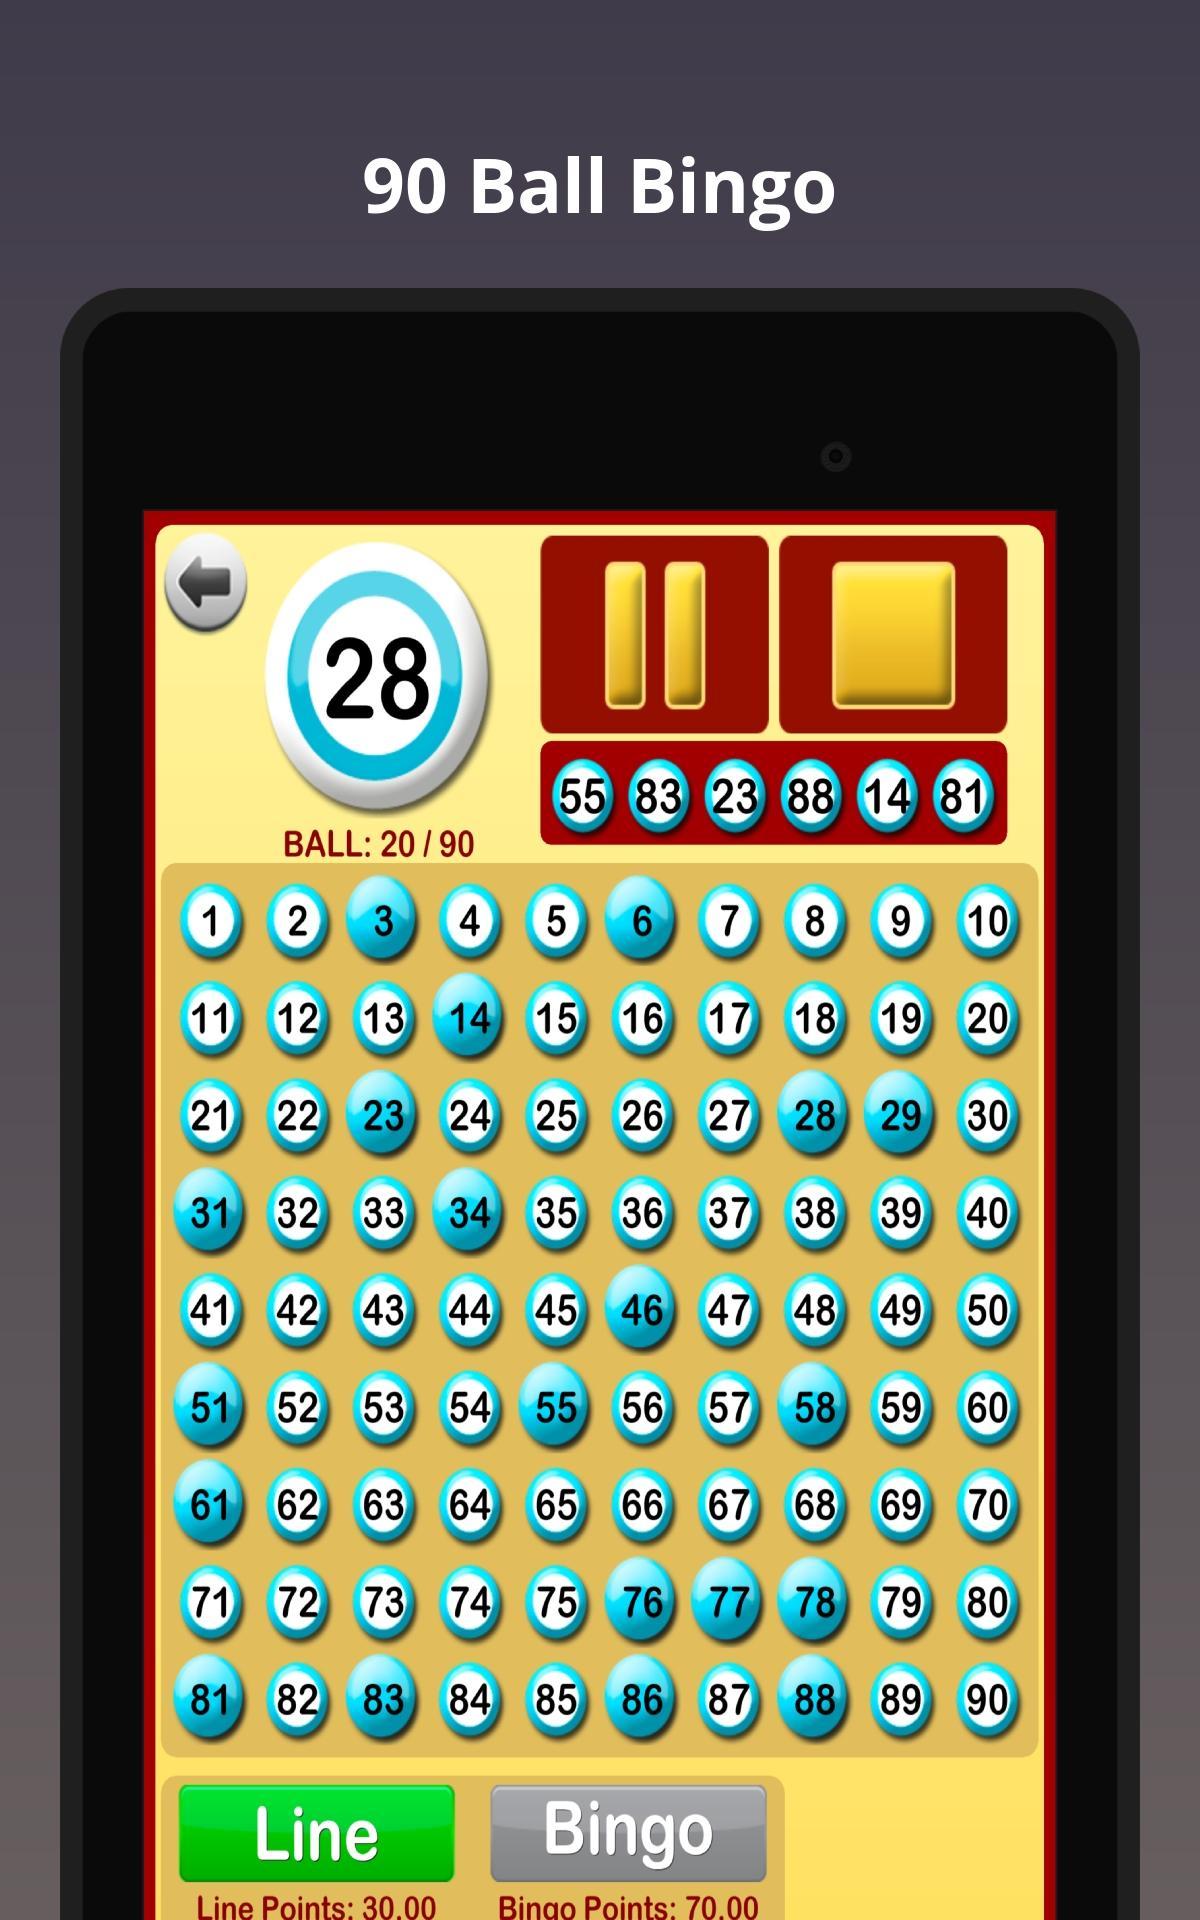 Bingo at Home for Android - APK Download